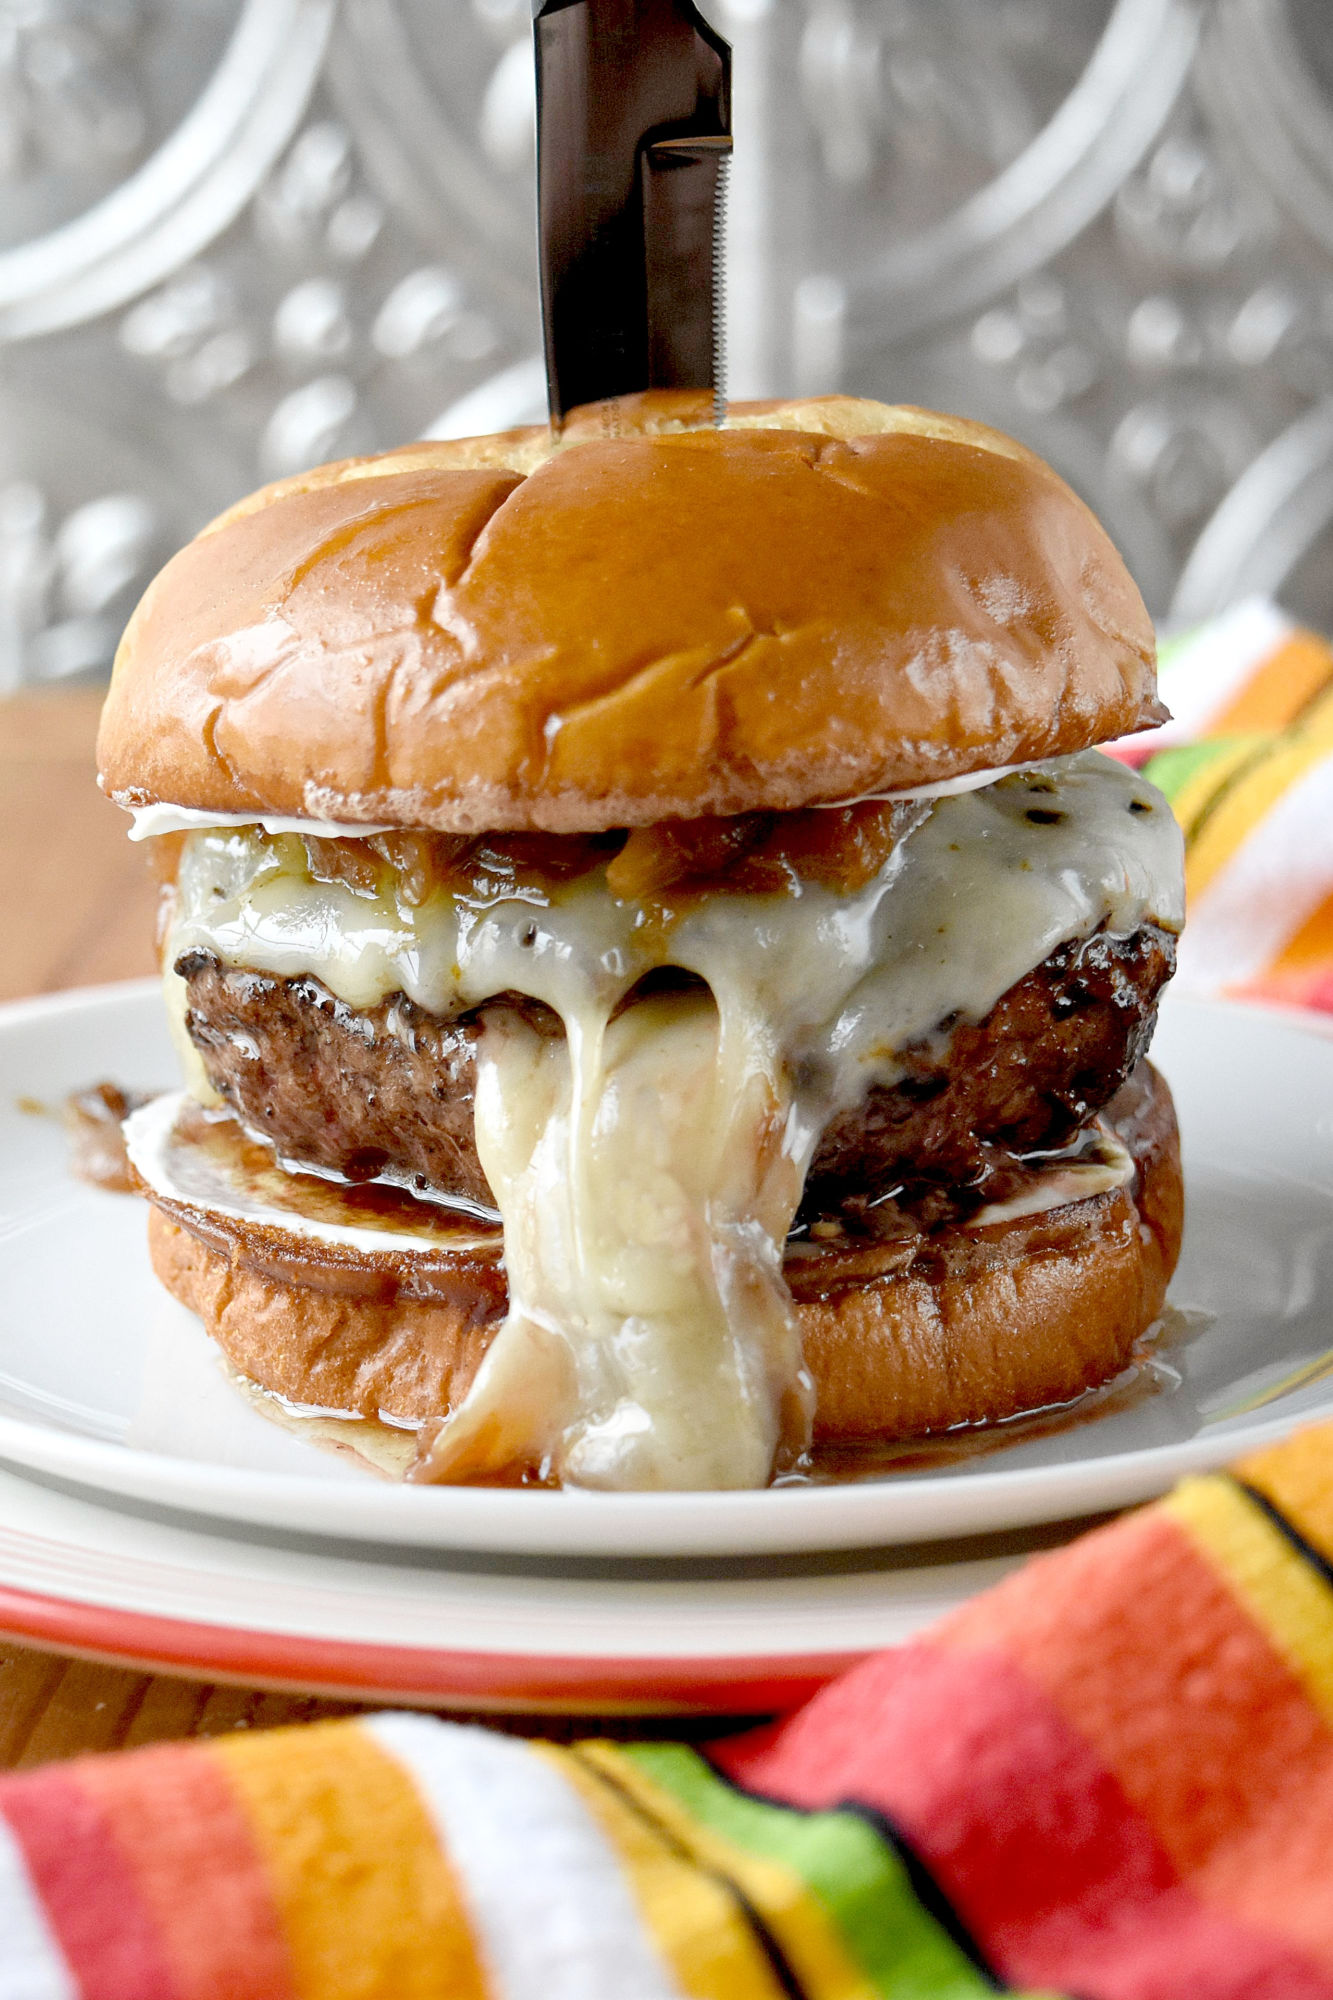 The caramelized onions make this French Onion Soup Burger over the top.  It's a labor of love but makes for one killer burger. #BurgerMonth